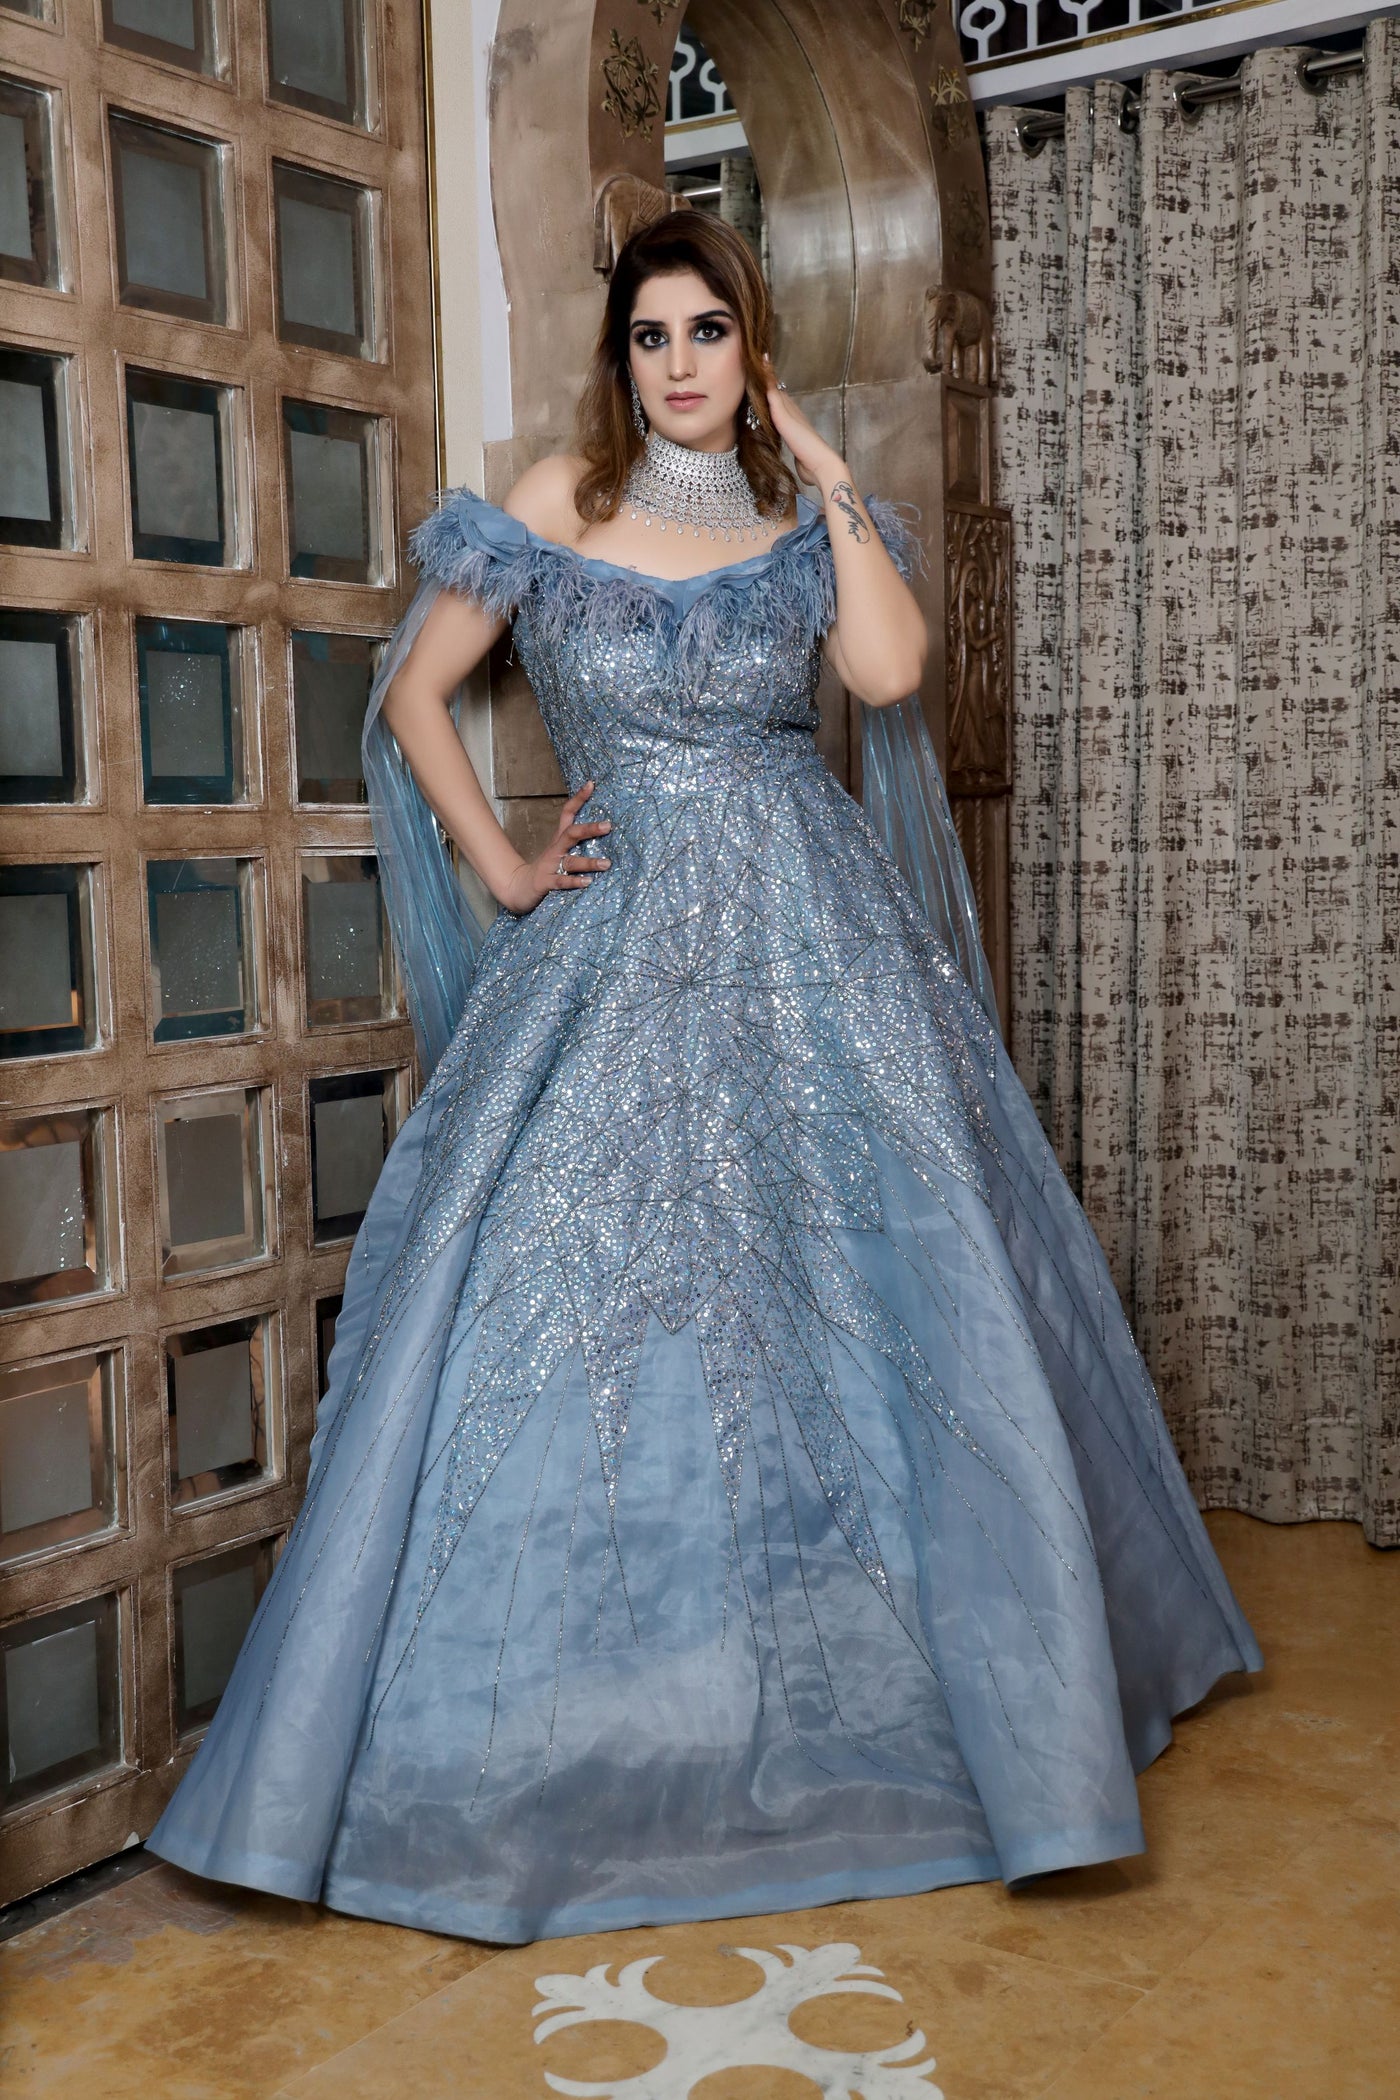 beautiful blue color geomatical motif gown